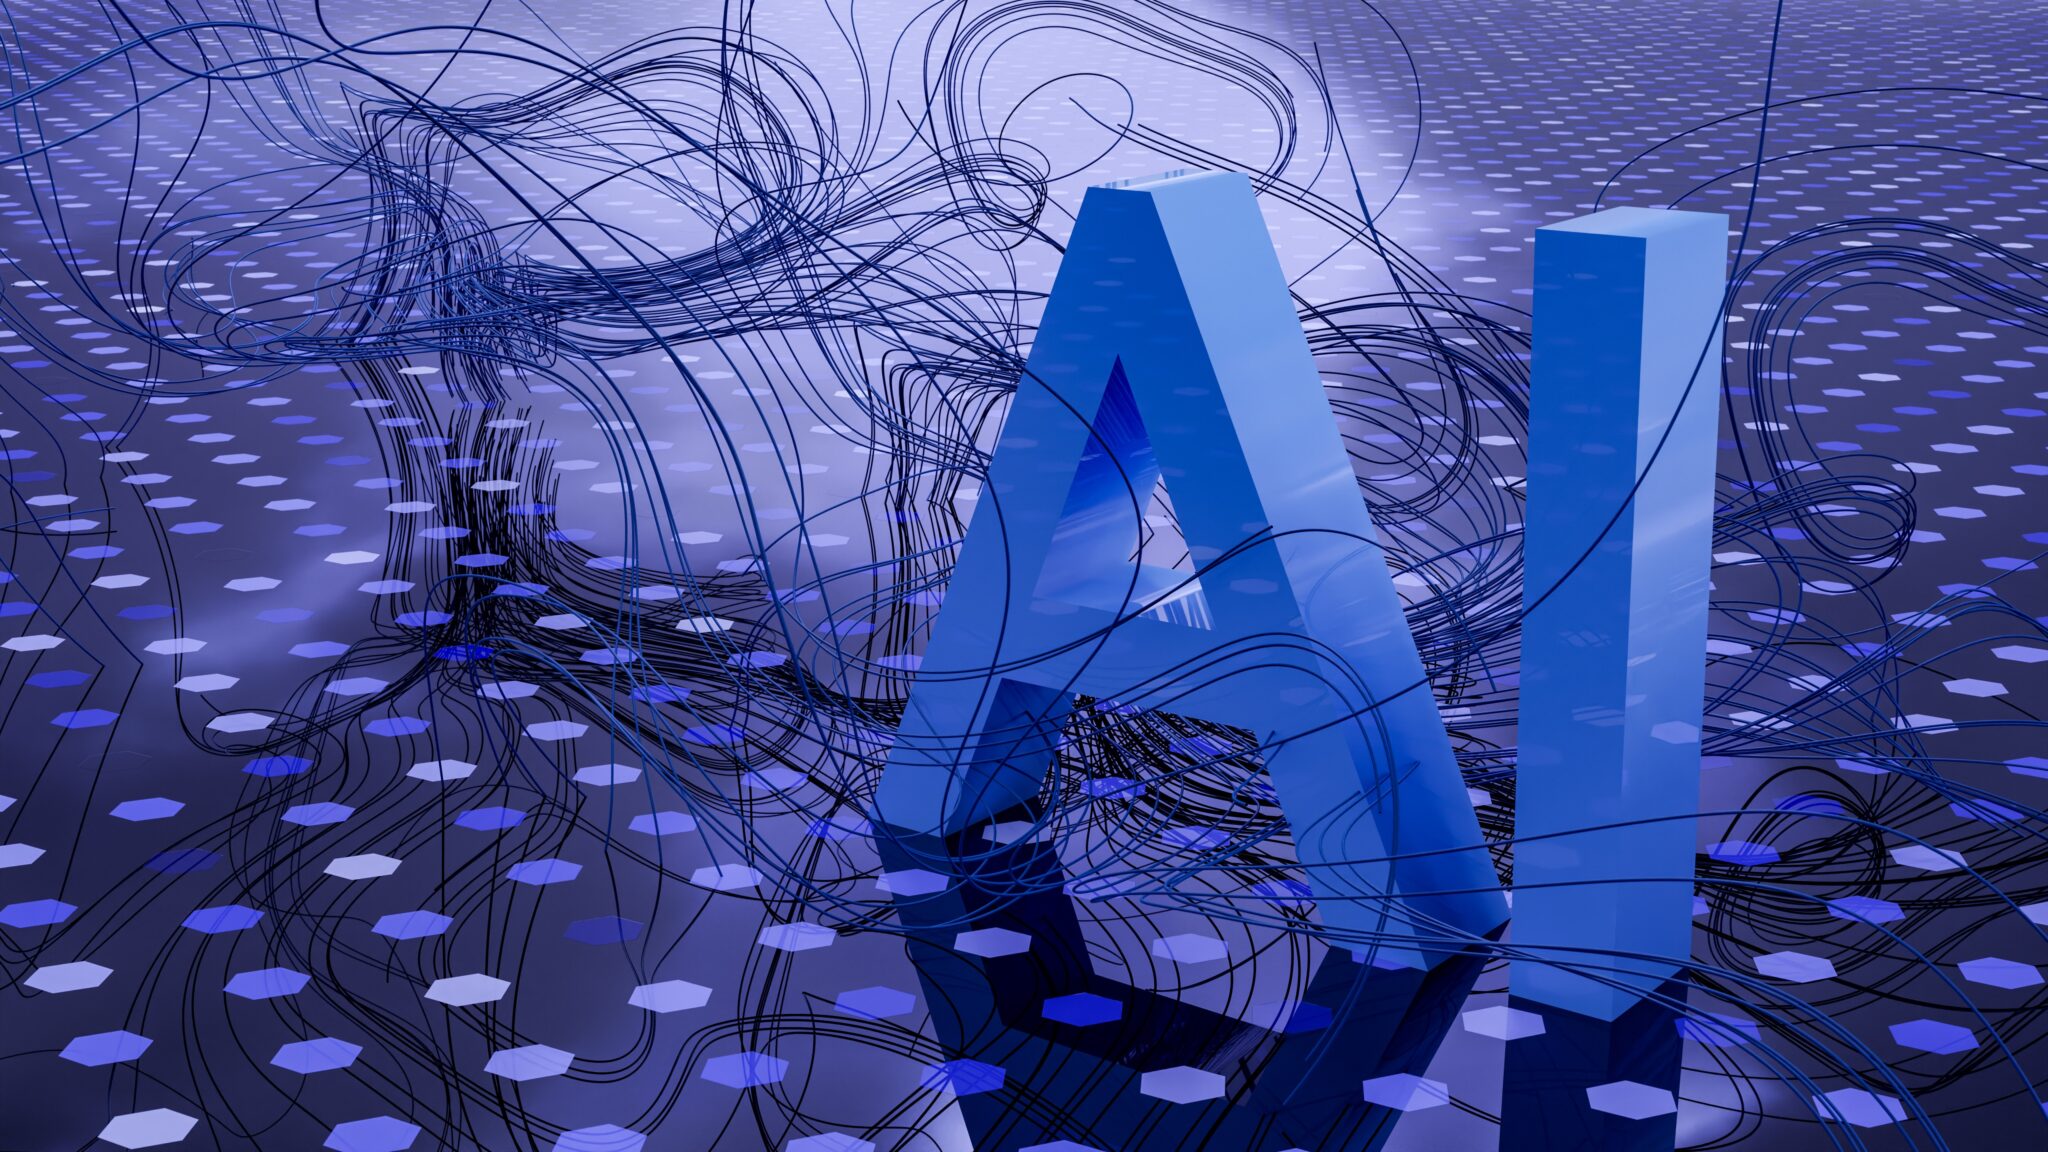 the image shows a purple background and two letters AI with wires around it